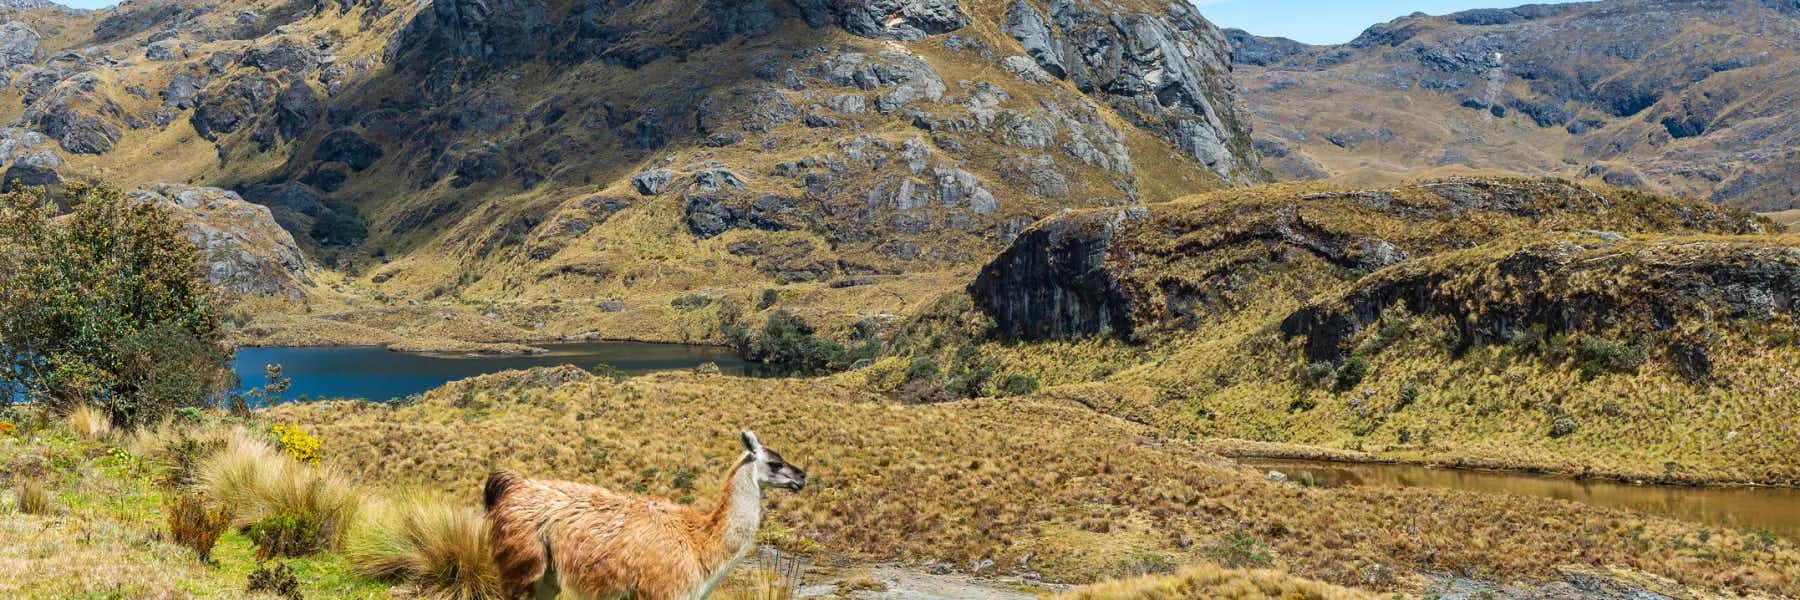 Exploring Cuenca’s Backyard: An Expat’s Guide to Cajas National Park - IL